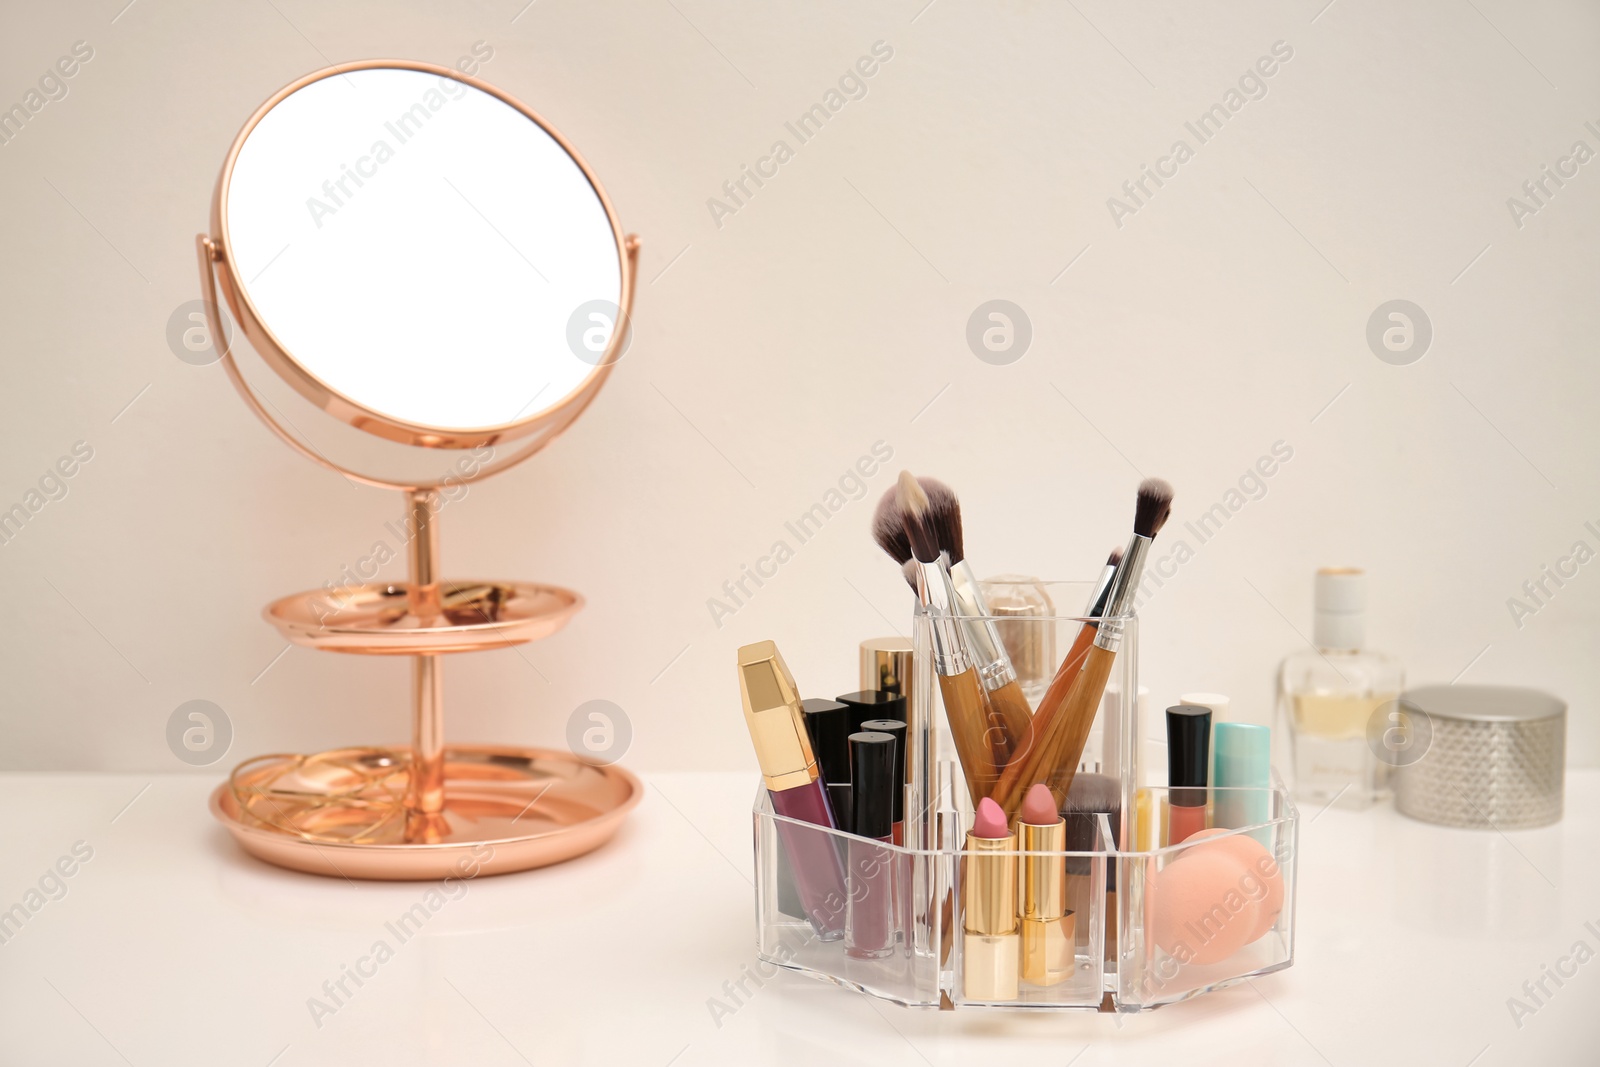 Photo of Makeup cosmetic products and tools in organizer on dressing table